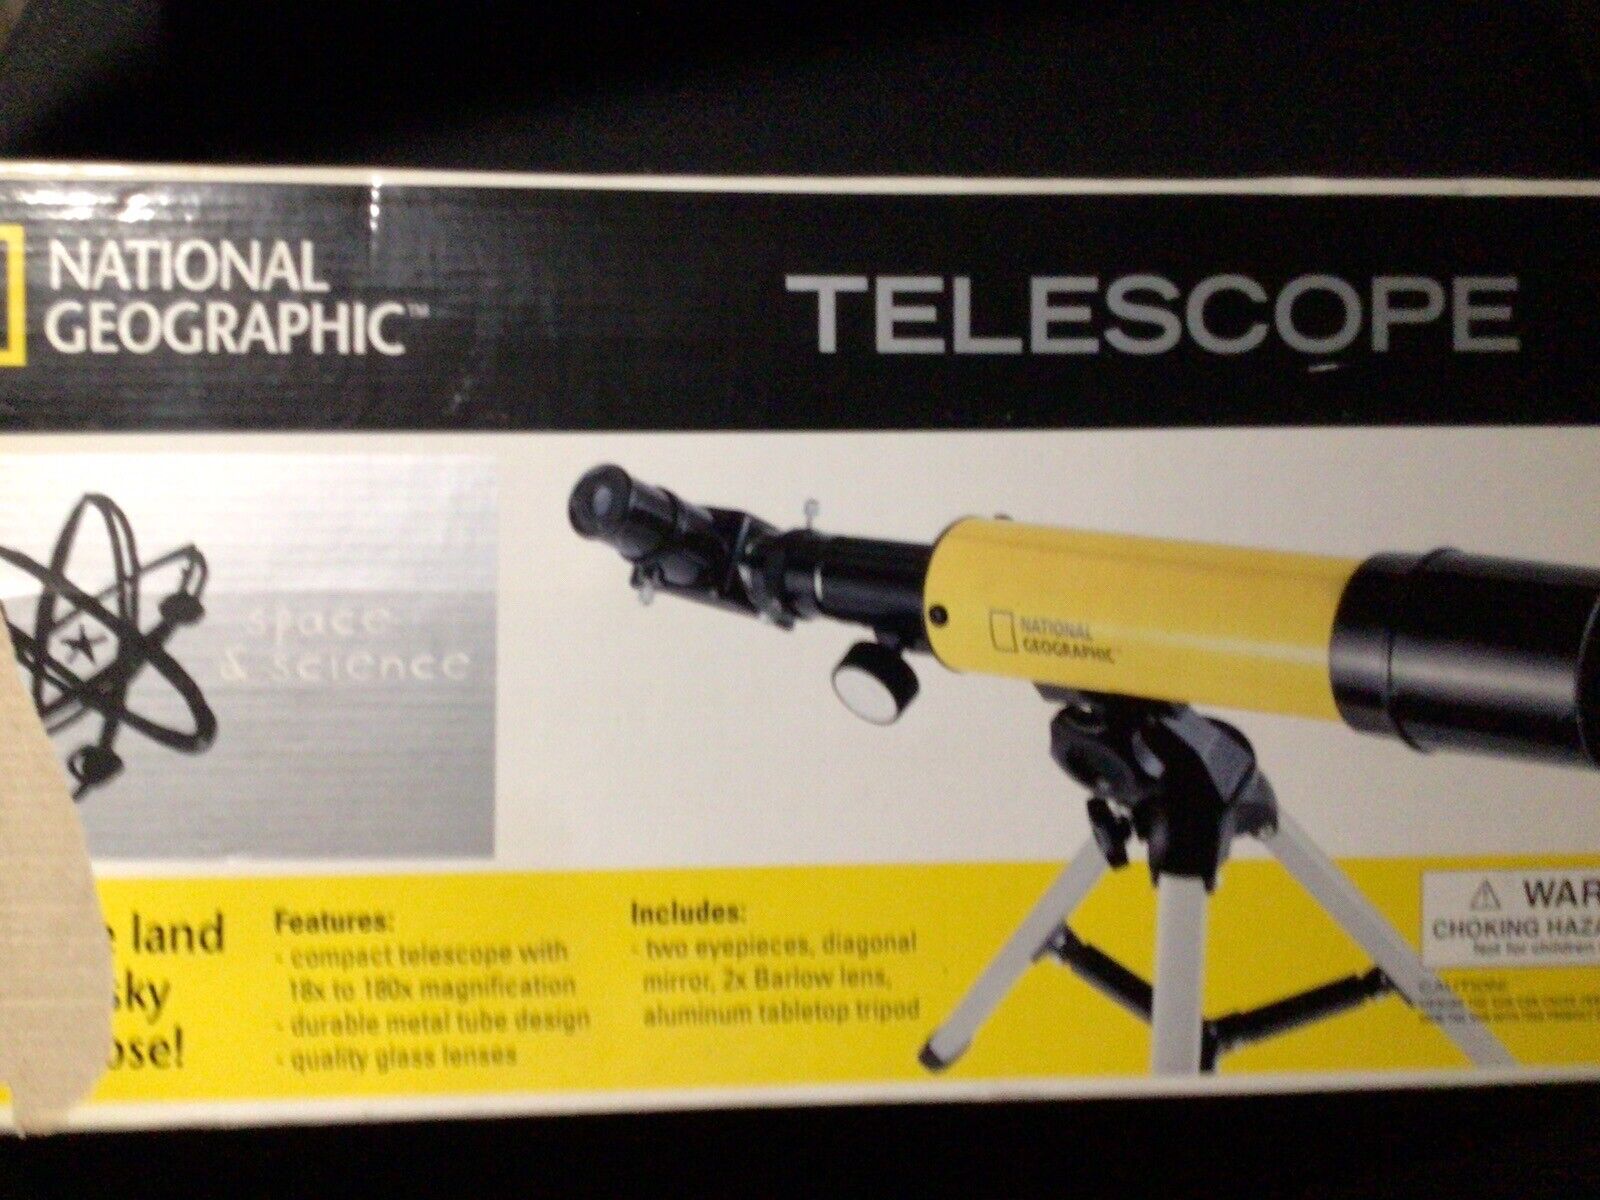 NATIONAL GEOGRAPHIC TELESCOPE 18X180 Magnification.